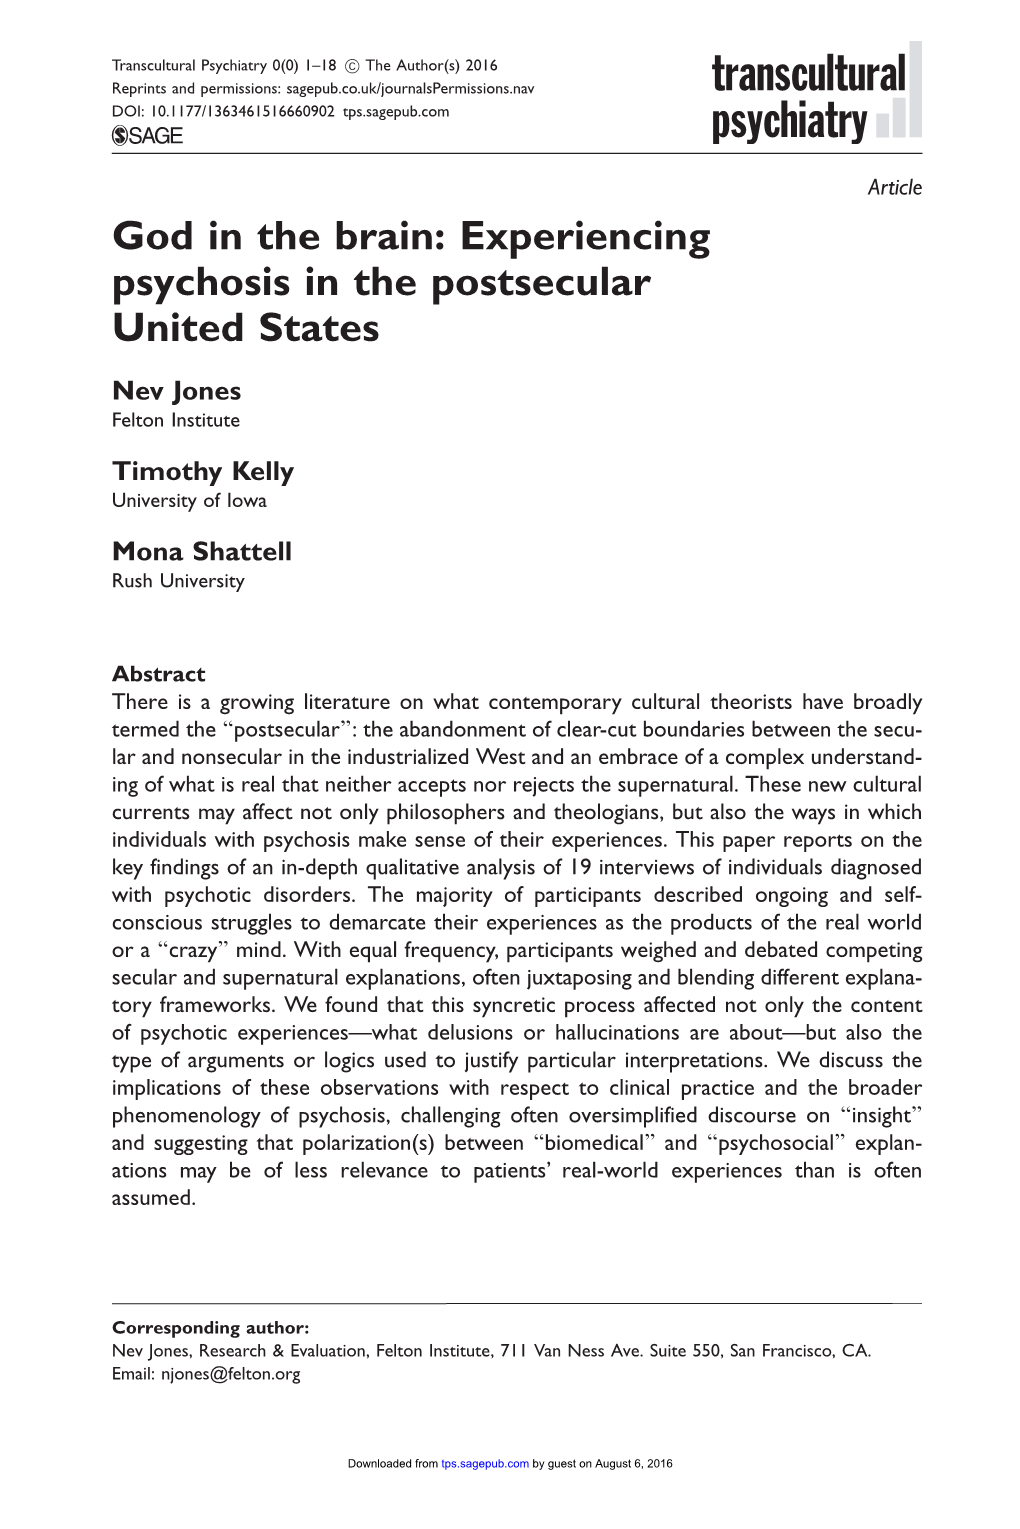 God in the Brain: Experiencing Psychosis in the Postsecular United States